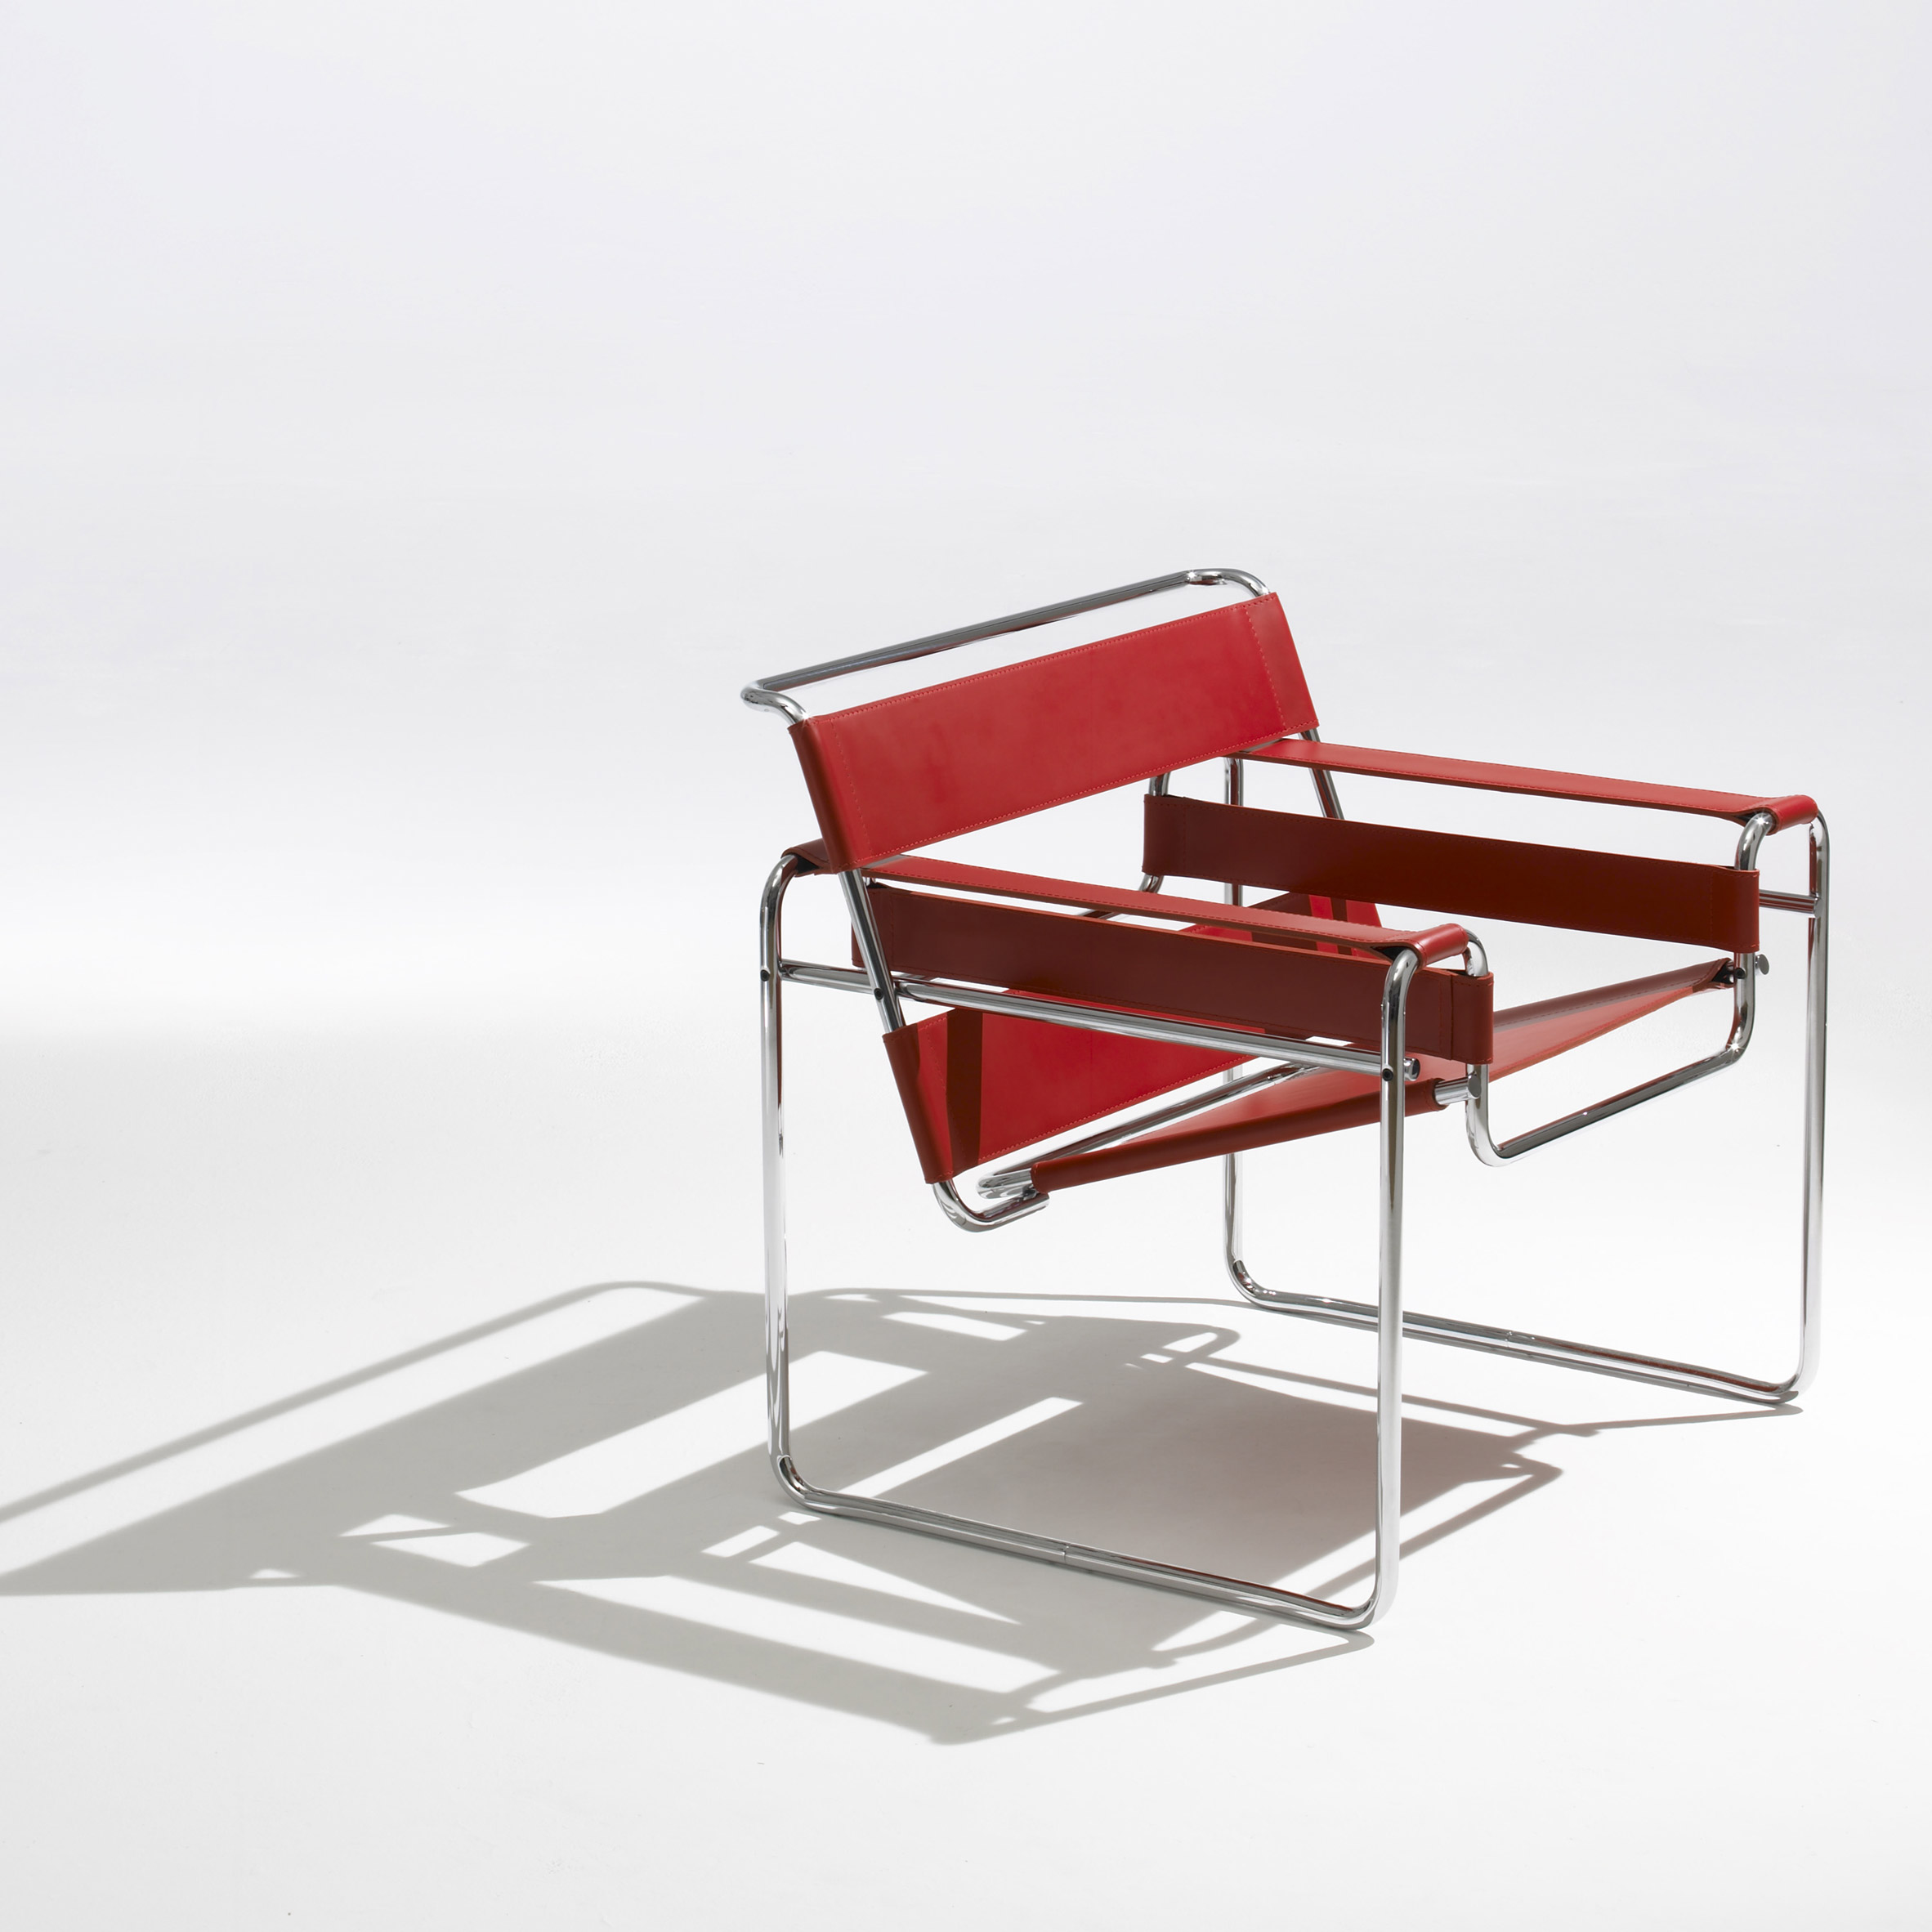 10 Iconic Bauhaus Furniture Designs Chairs Tables A Lamp And A